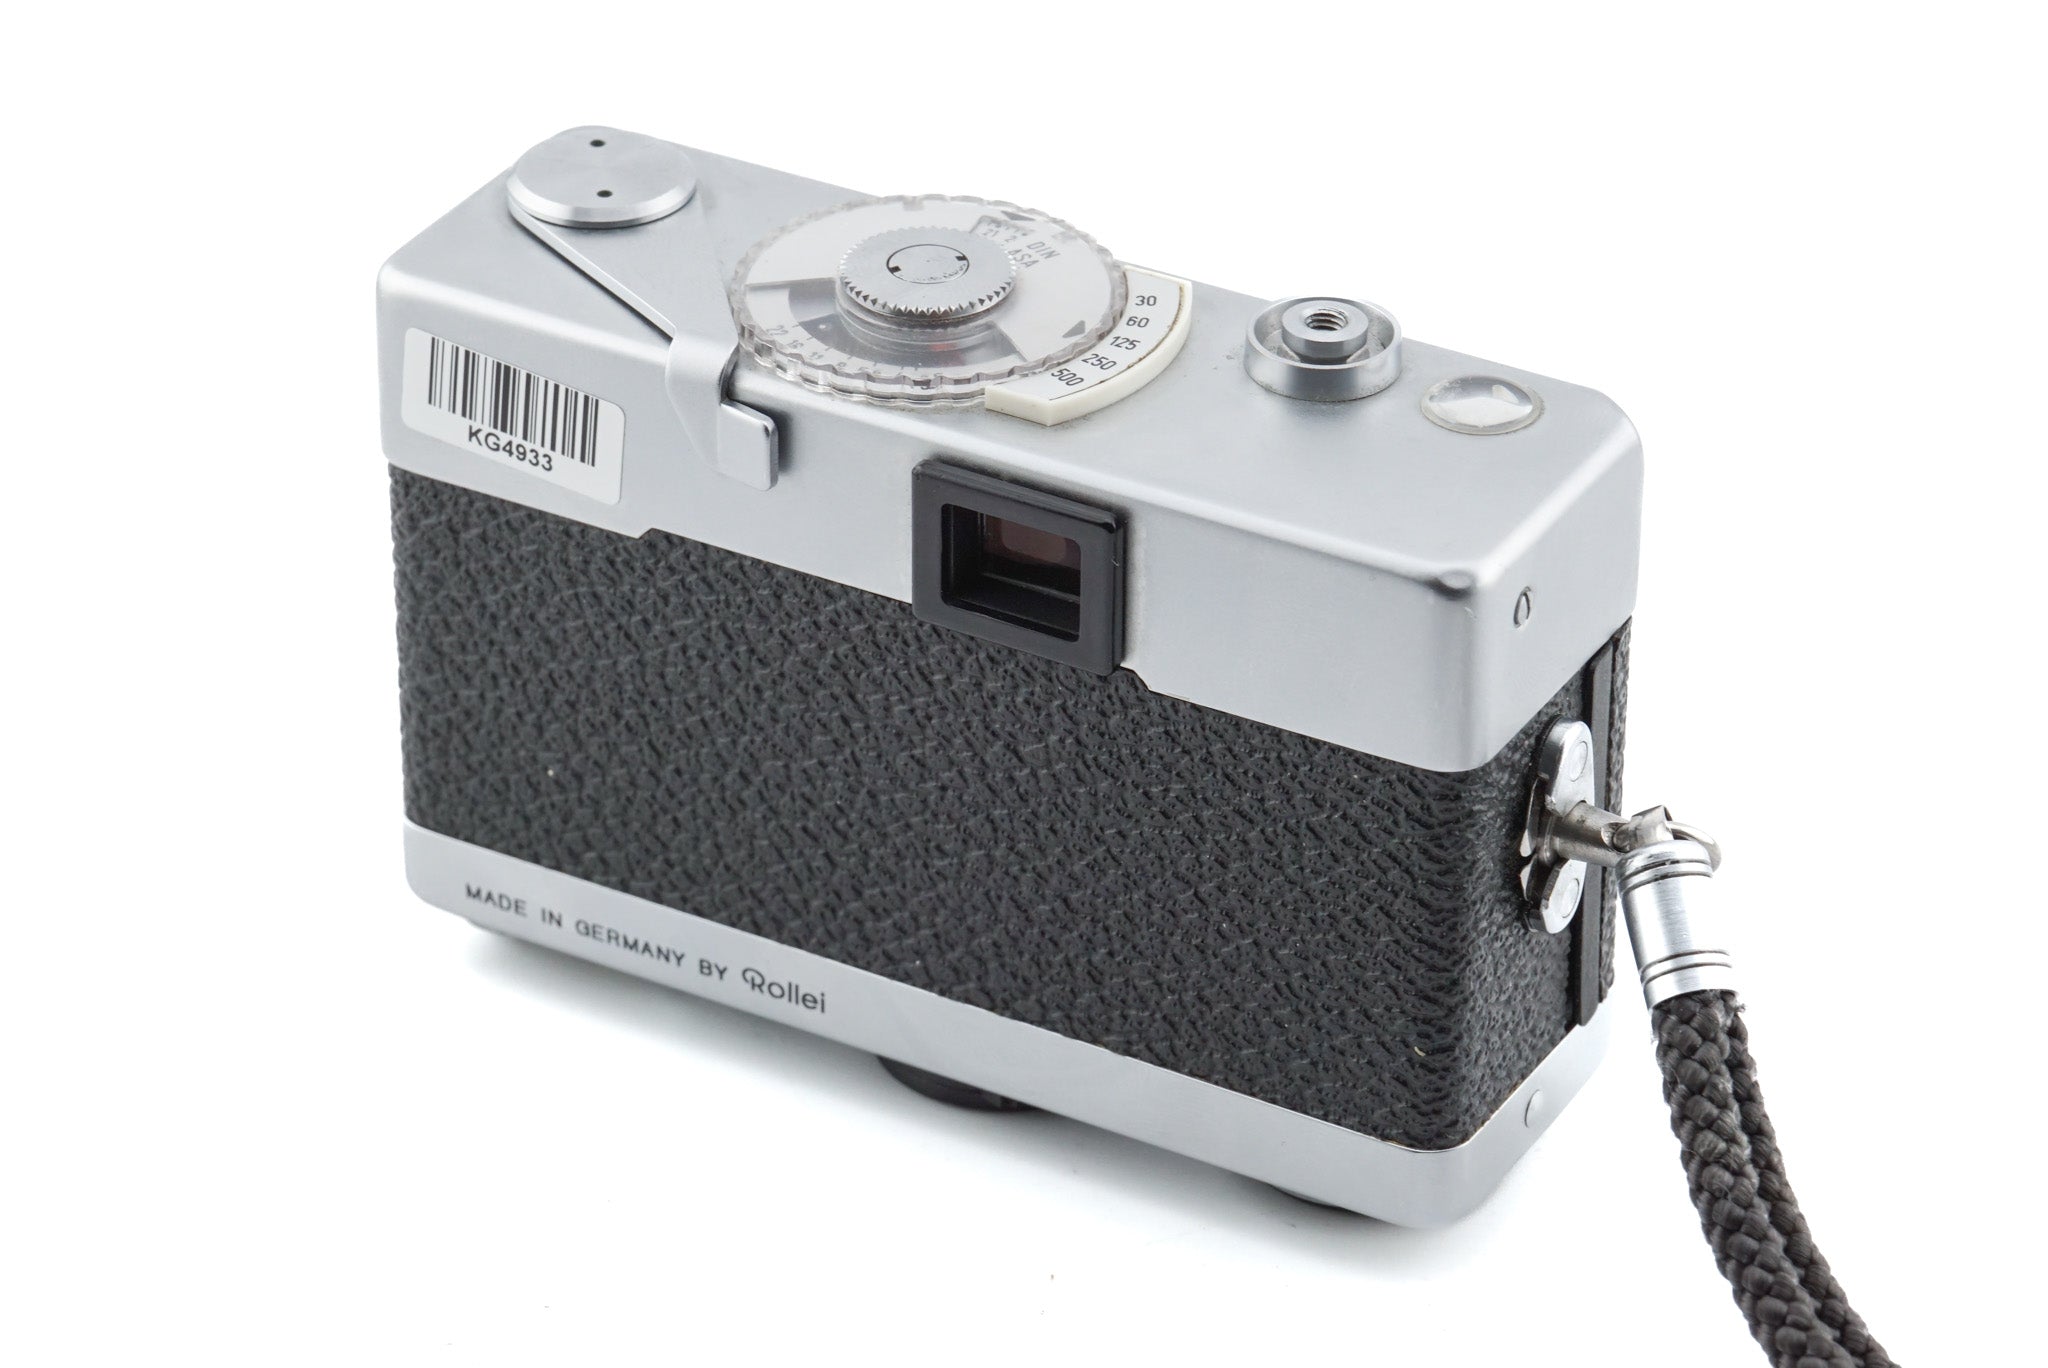 Rollei B 35 (35 B) - with 6 month warranty